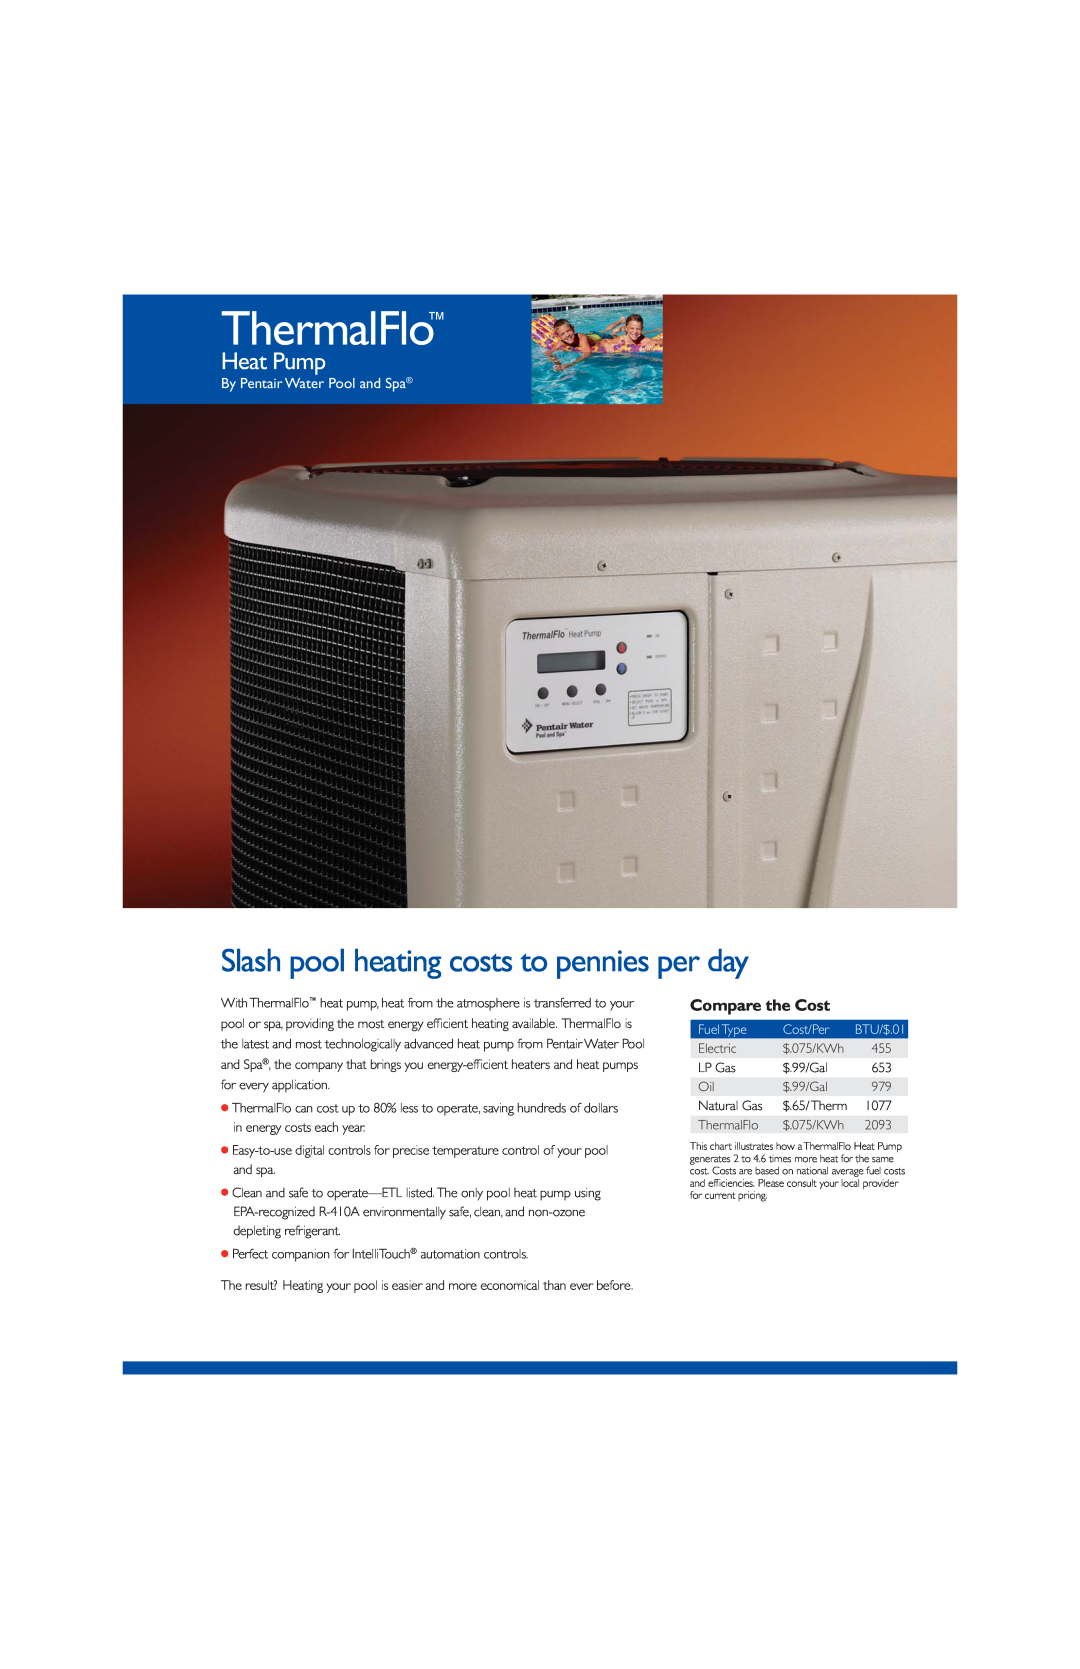 Pentair 1200R H/C manual ThermalFlo, Compare the Cost, Slash pool heating costs to pennies per day, Heat Pump, Fuel Type 